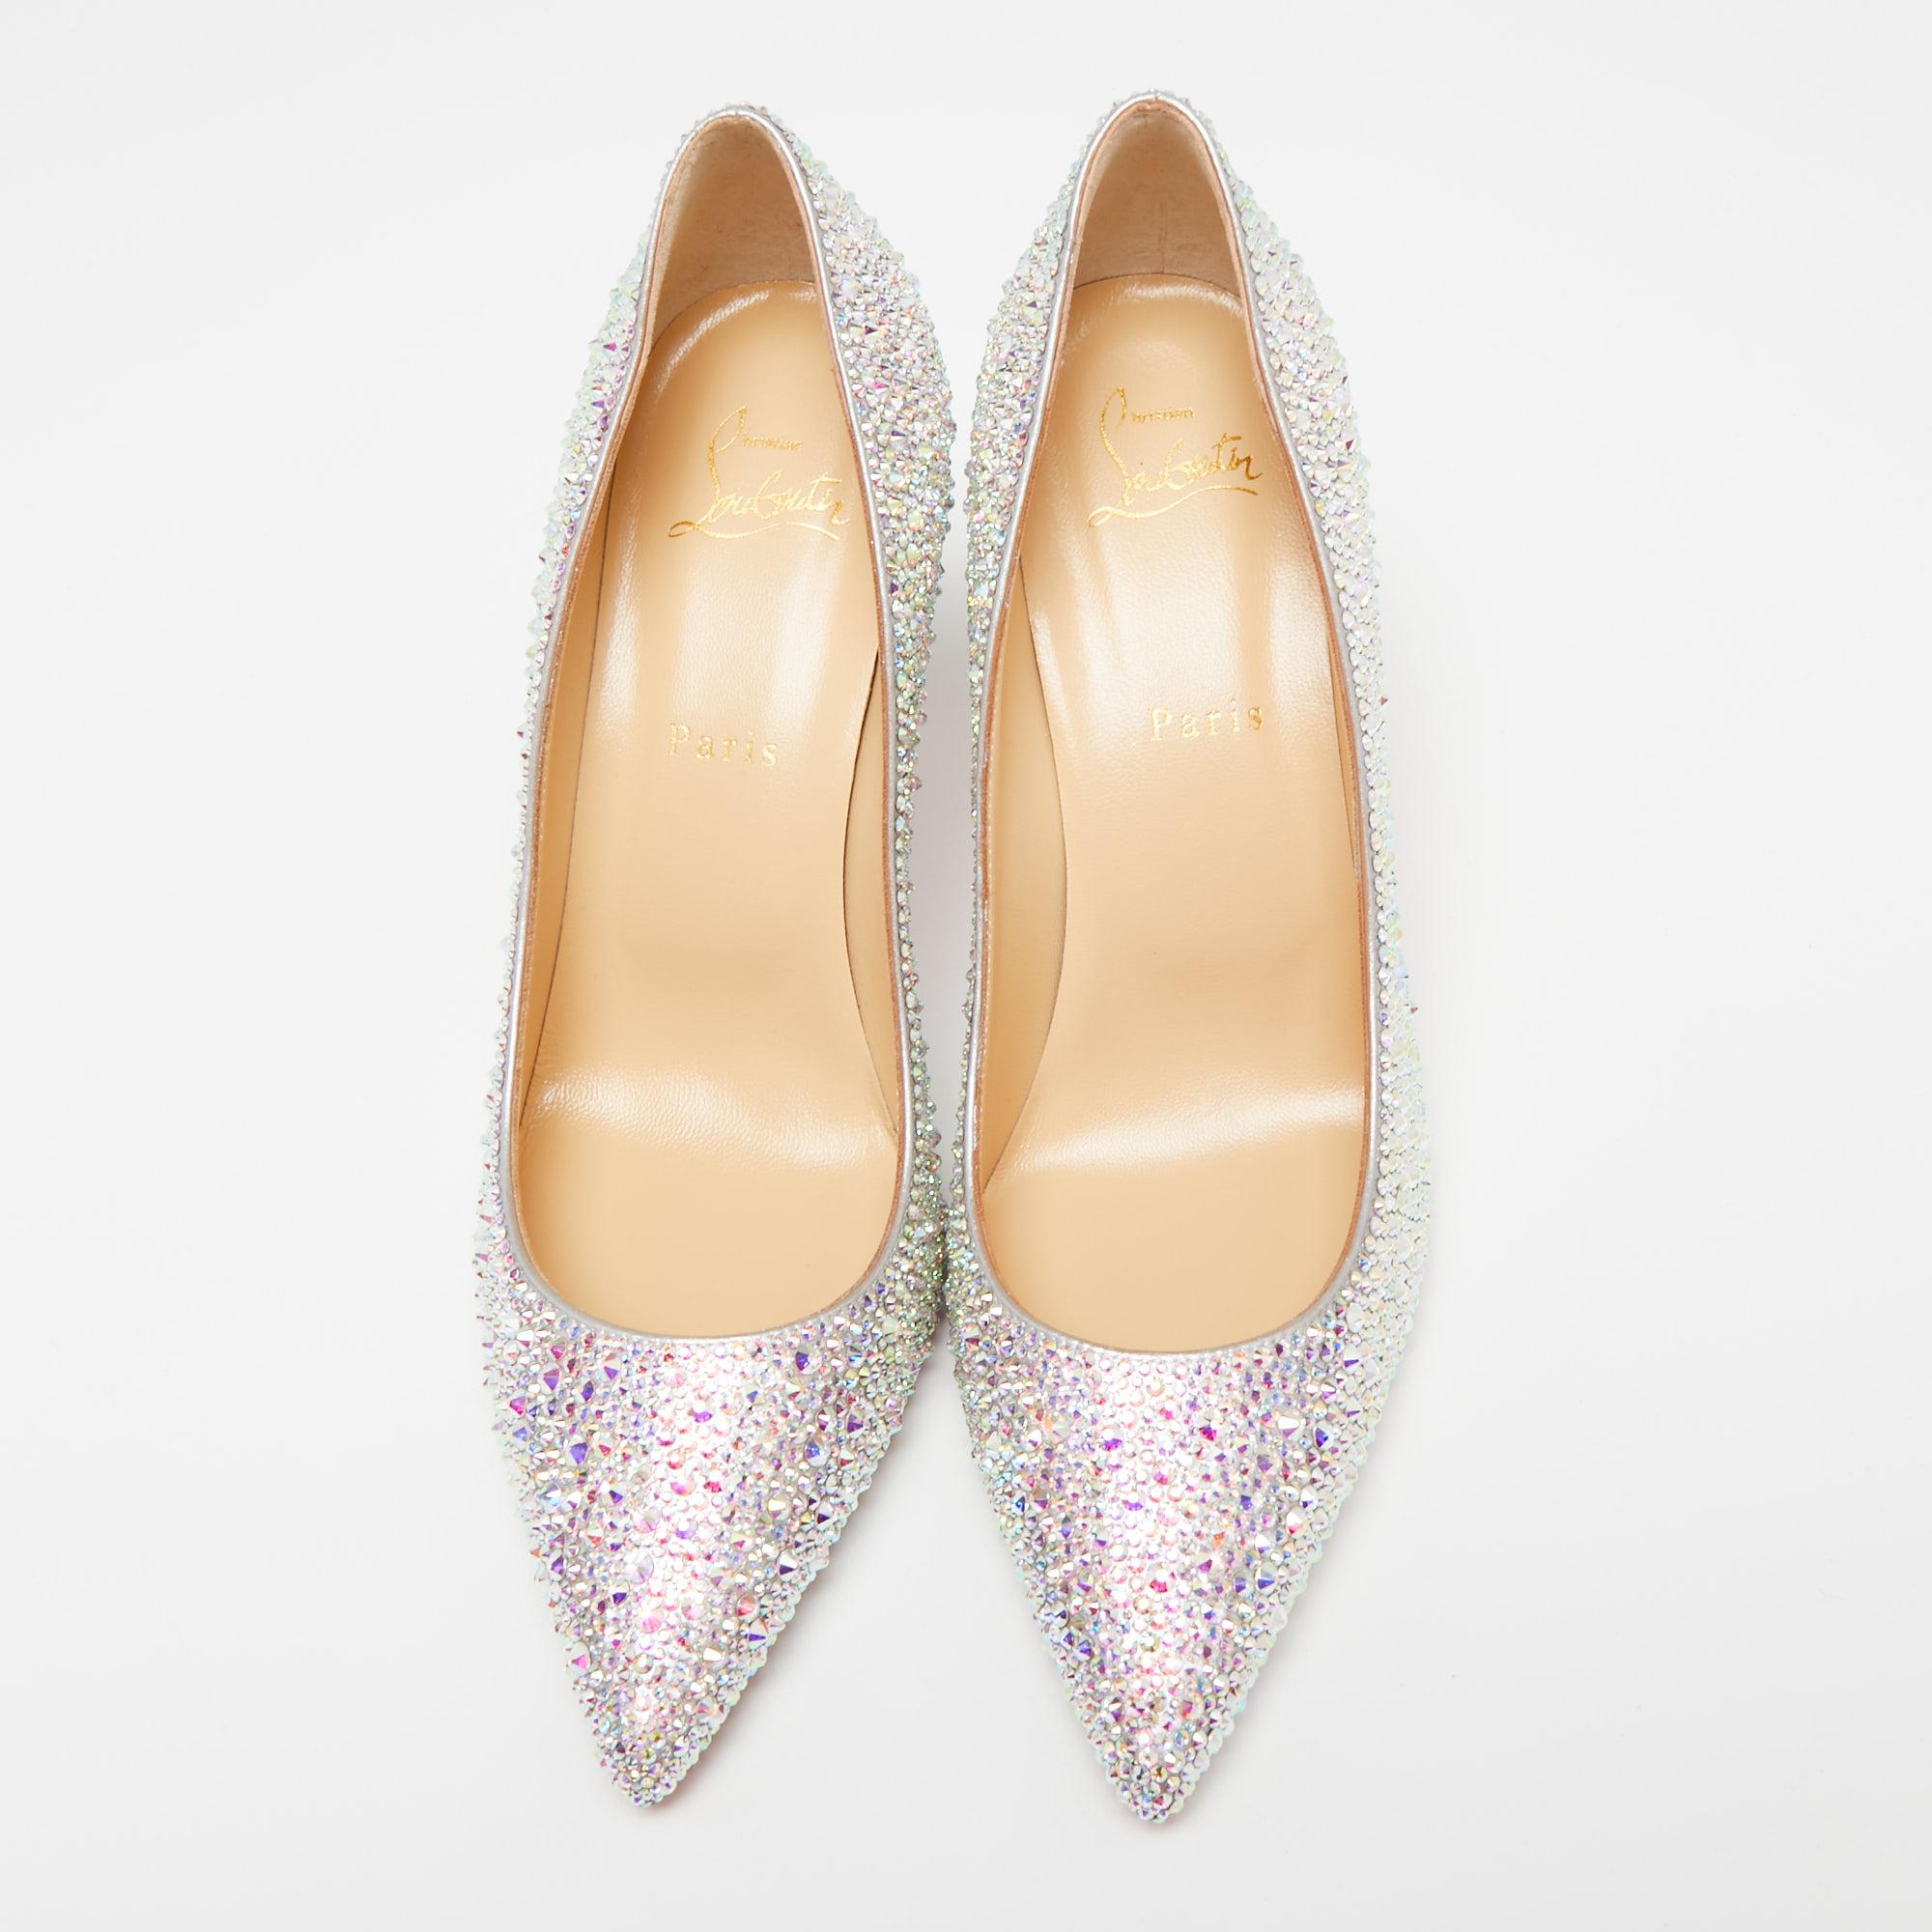 One of Christian Louboutin's most loved styles is the Kate pumps. These here are crafted in leather, flaunting a beautiful multicolored exterior with shimmering studs all over, pointed toes, and 8.5 cm high heels that create a stunning